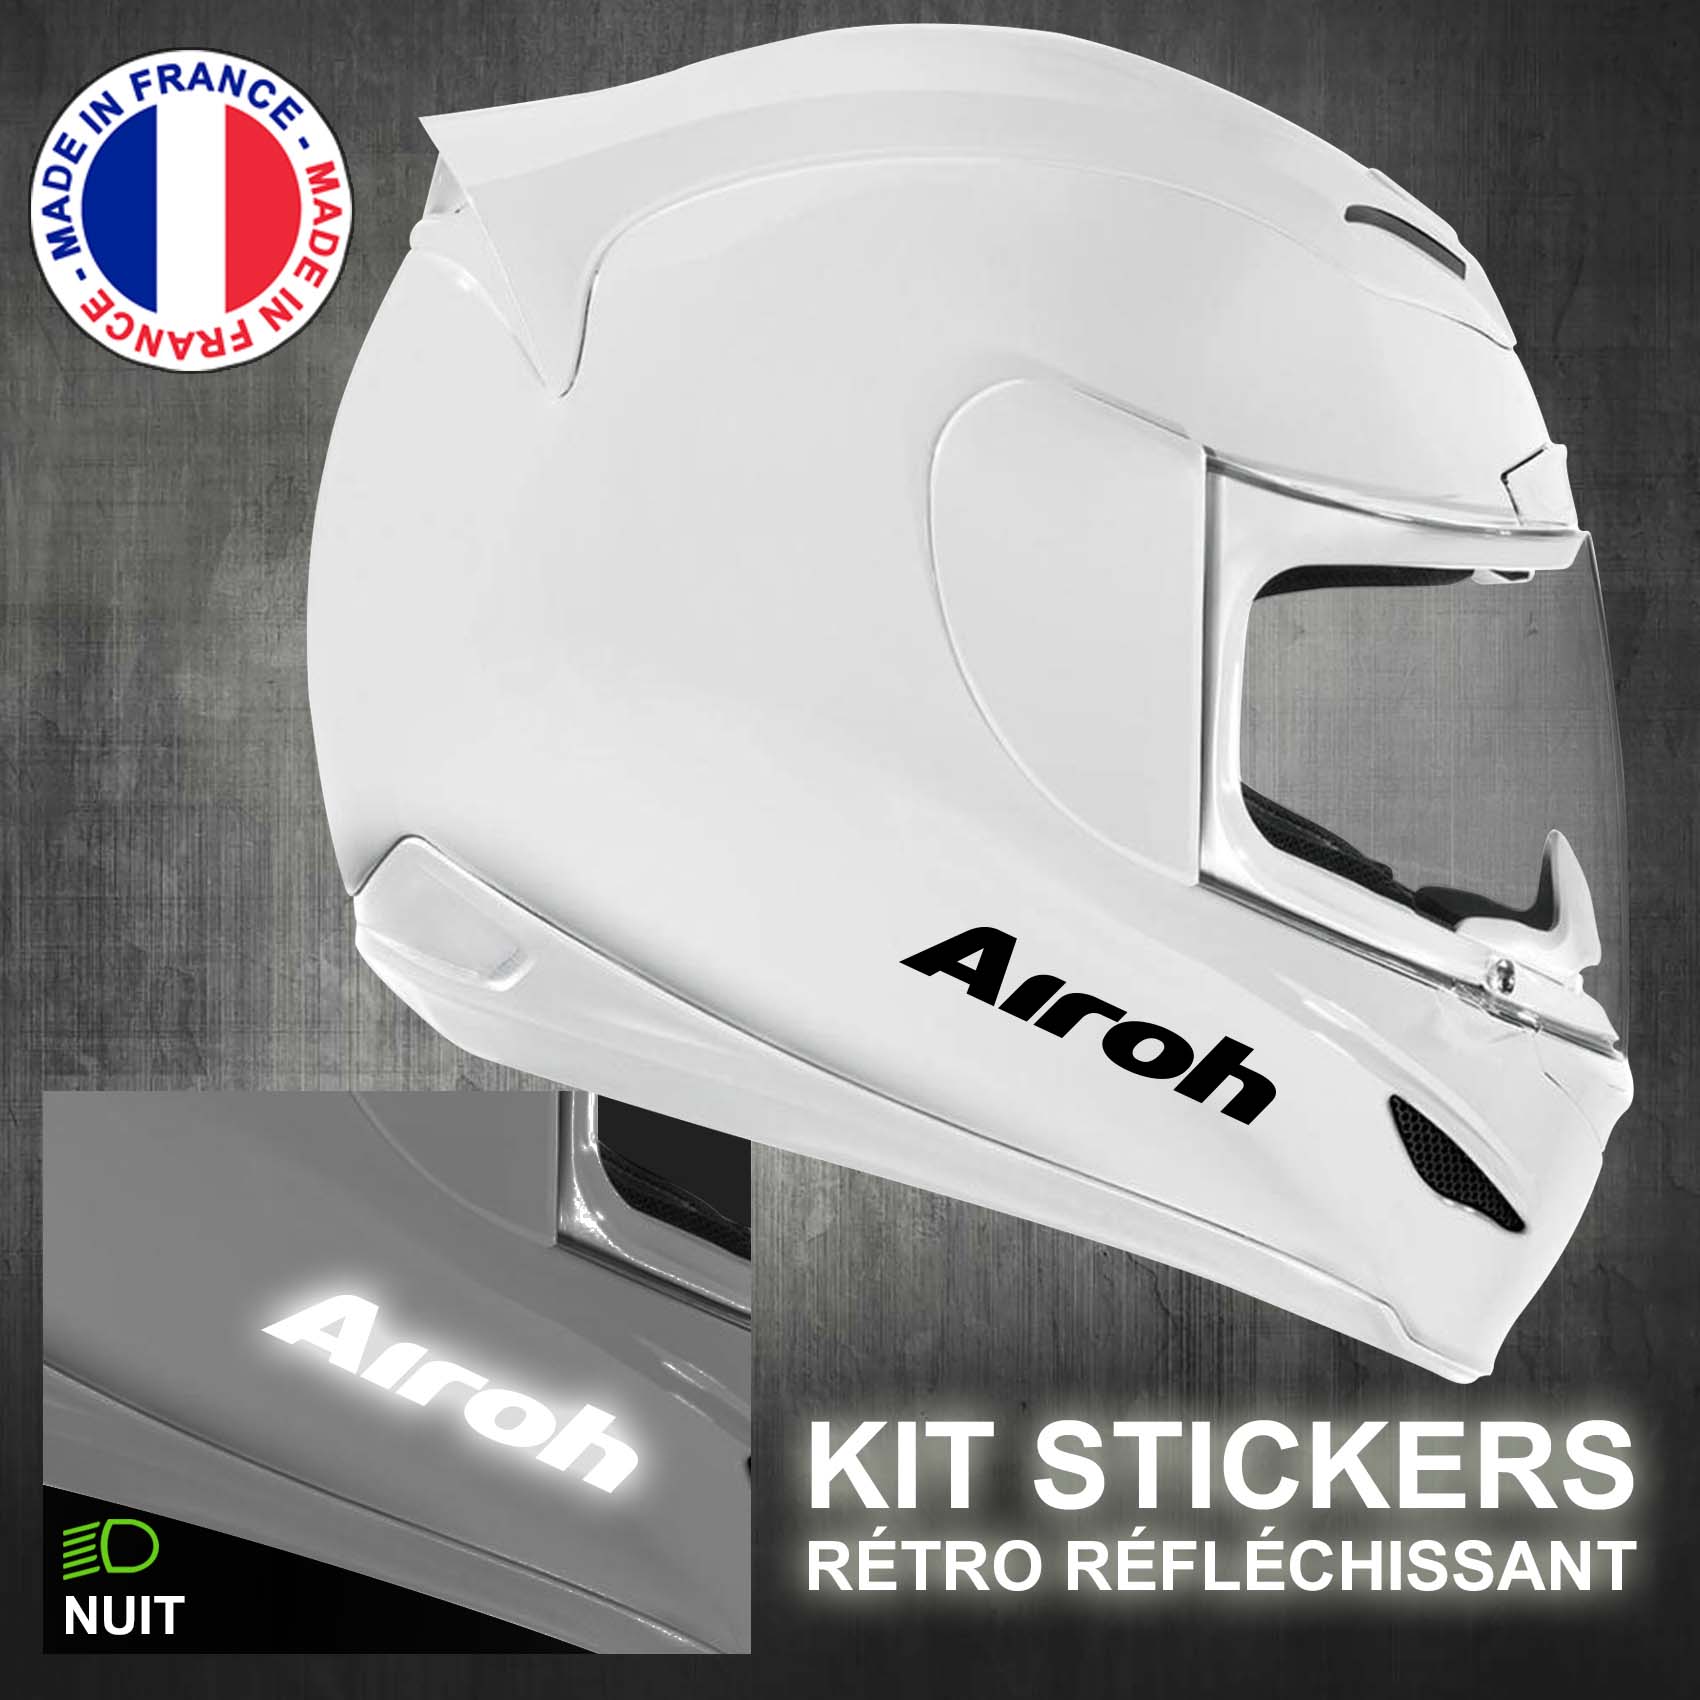 stickers-casque-moto-airoh-ref2-retro-reflechissant-autocollant-moto-velo-tuning-racing-route-sticker-casques-adhesif-scooter-nuit-securite-decals-personnalise-personnalisable-min